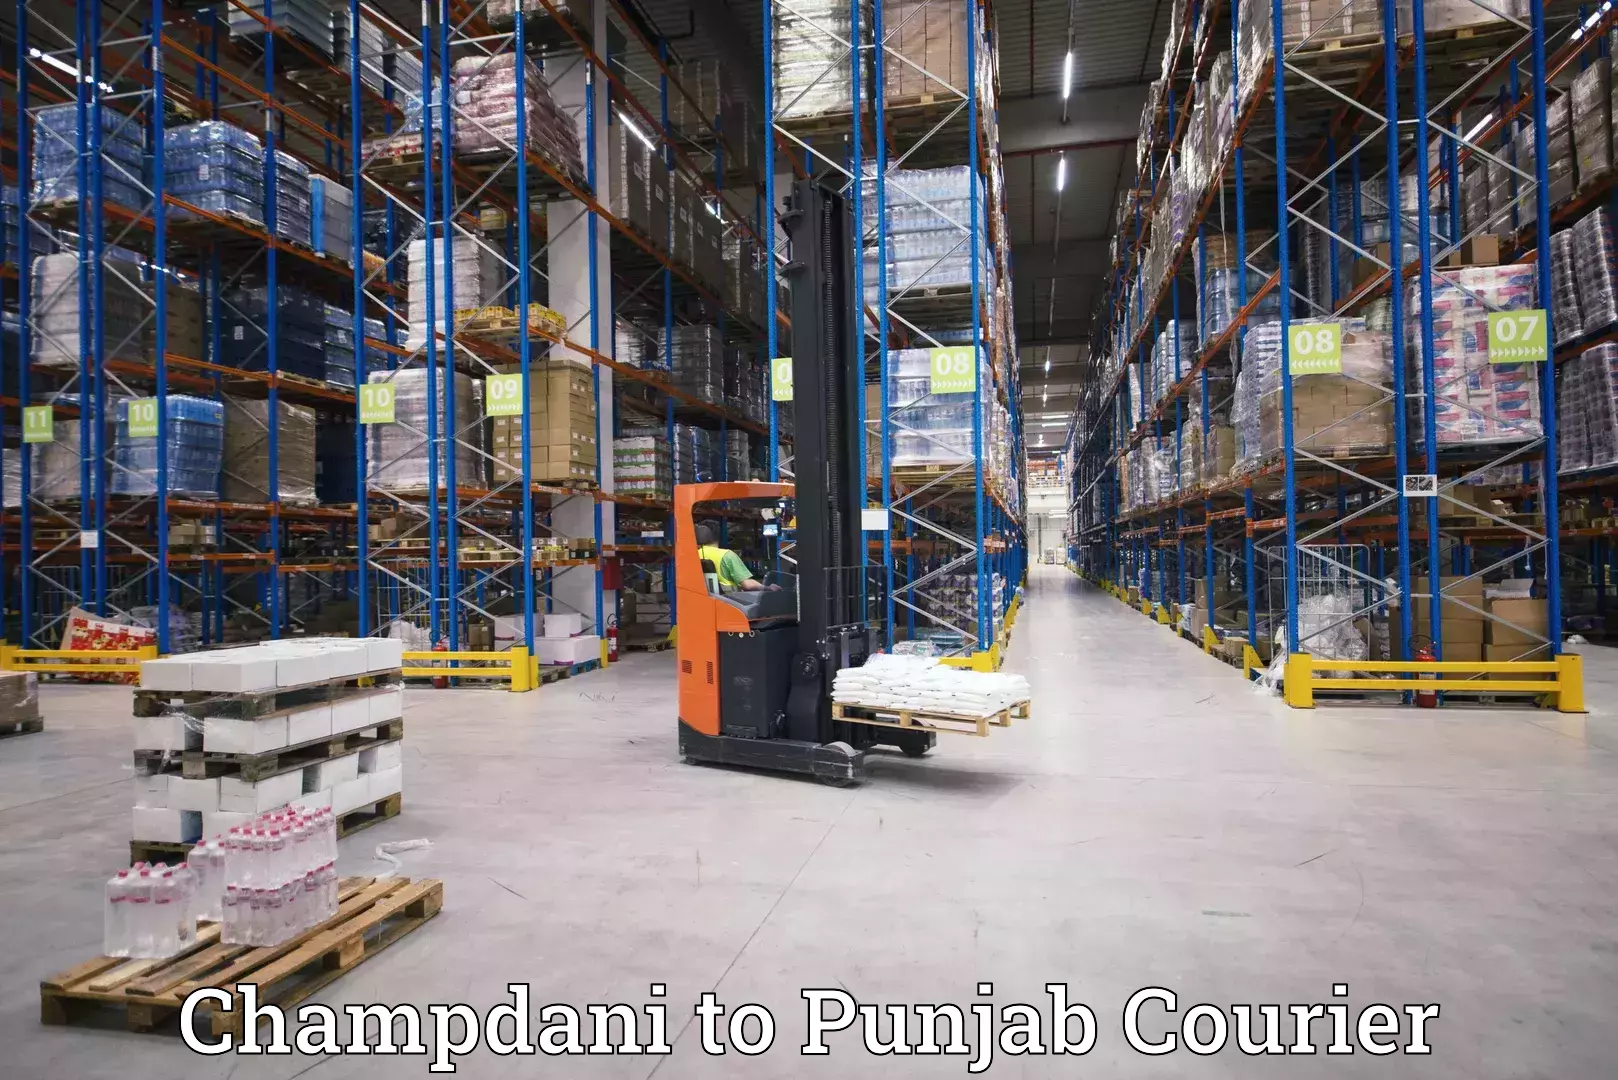 Efficient shipping operations Champdani to Abohar